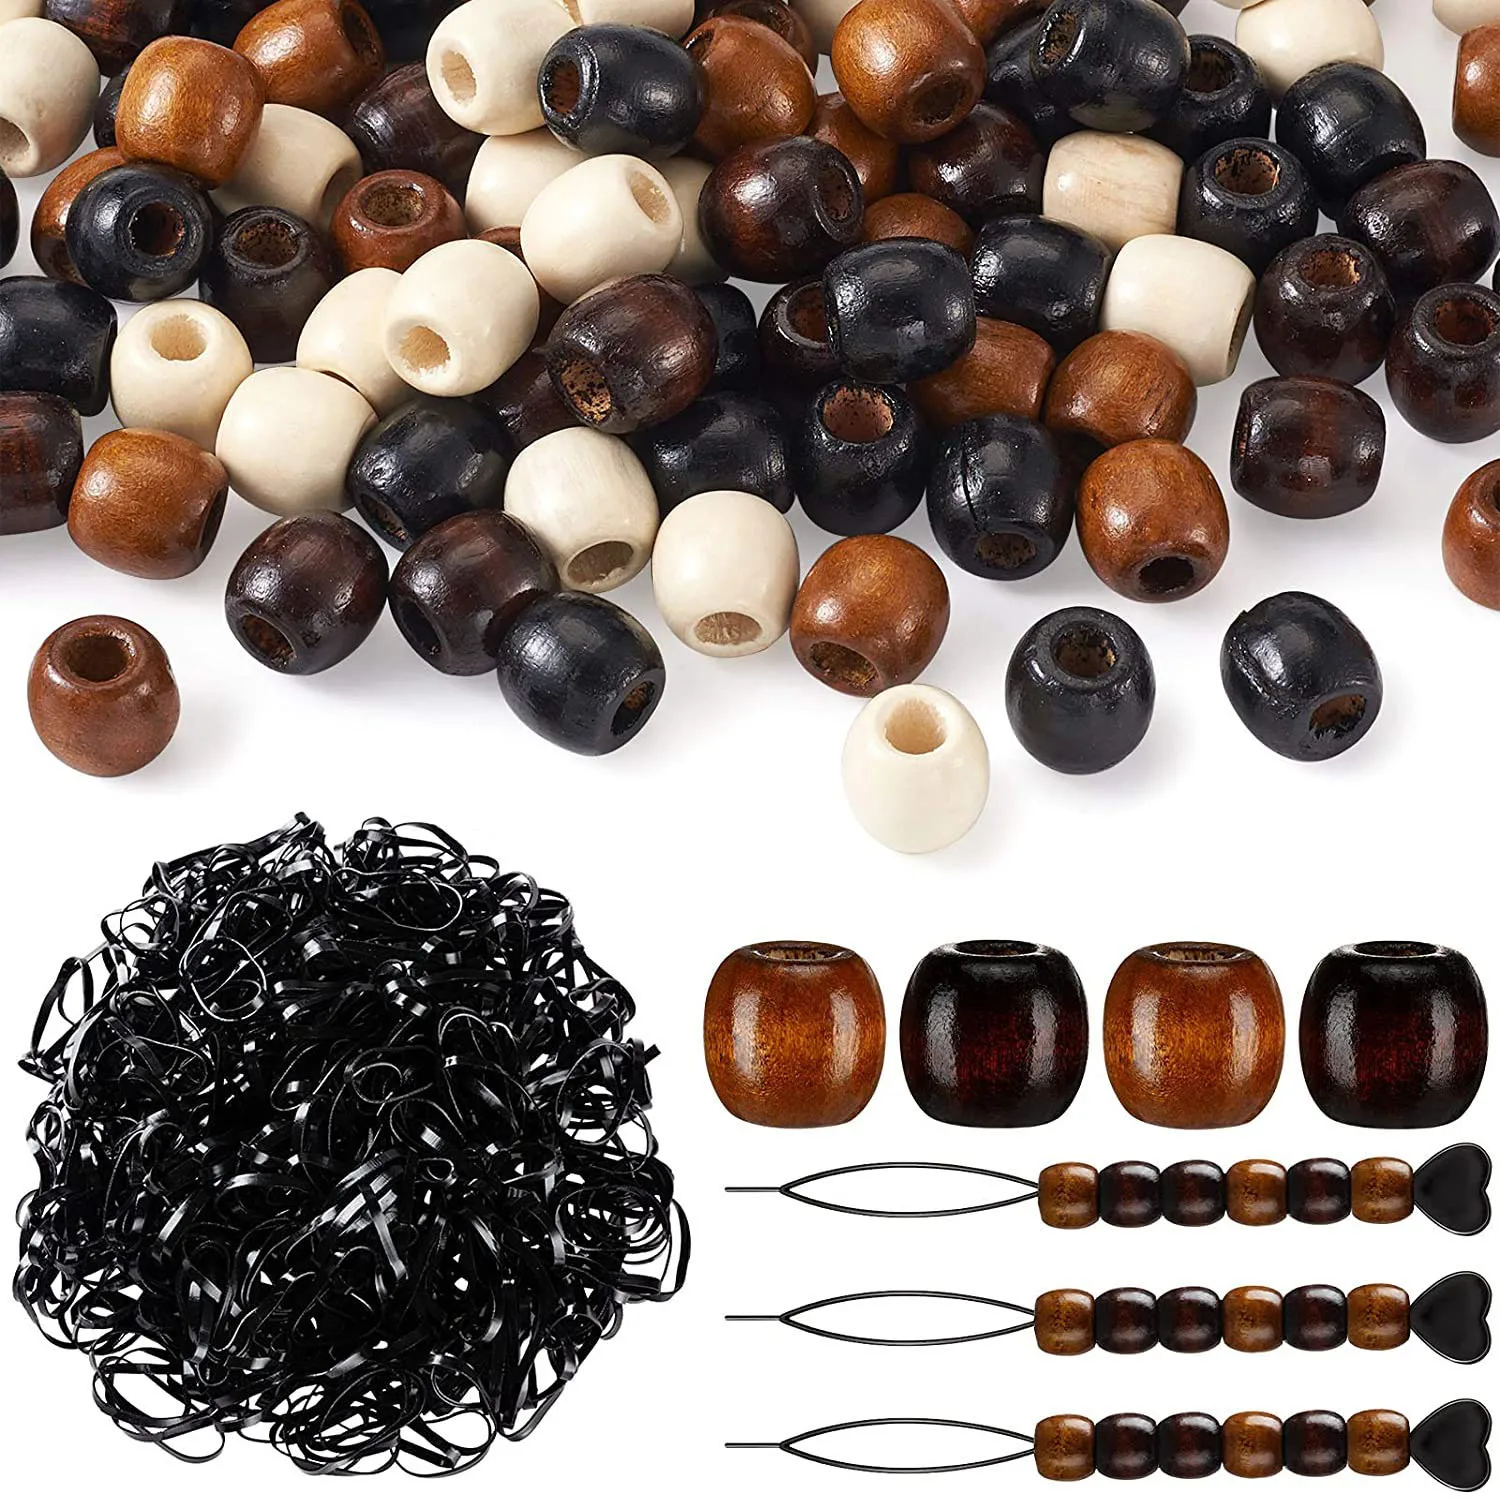 100Pcs 12mm Coffee Colors Wooden Dreadlock Hair Beads Send 100pcs Rubber Band 1pcs Tools with 5mm Hole for Loc Jewelry Dreadlock